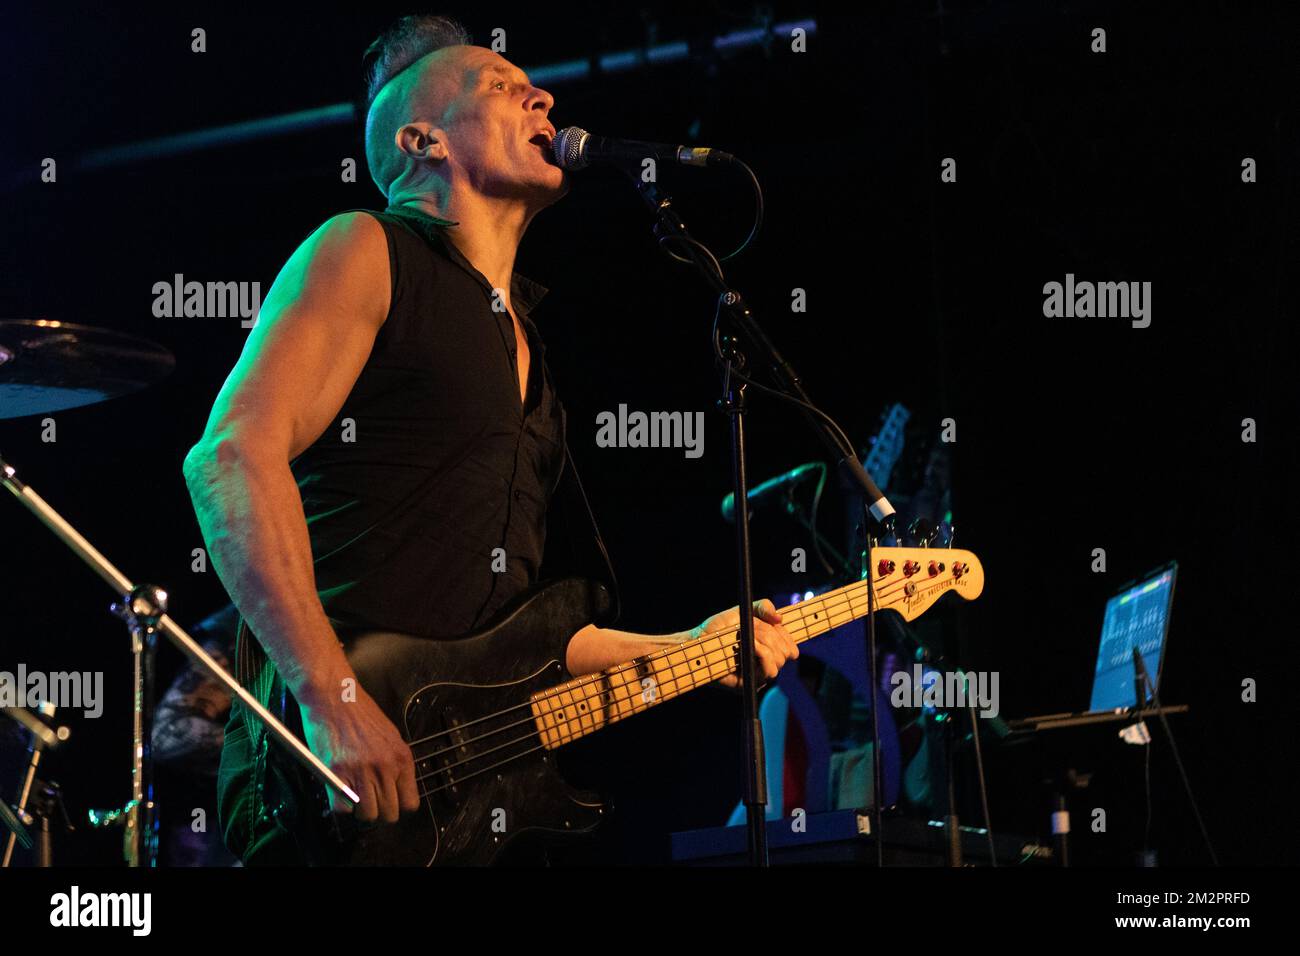 Oxford, United Kingdom. 12th, December 2022. The English post-punk band The Membranes performs a live concert at the O2 Academy Oxford in Oxford. Here singer and bass player John Robb is seen live on stage. (Photo credit: Gonzales Photo – Per-Otto Oppi). Stock Photo